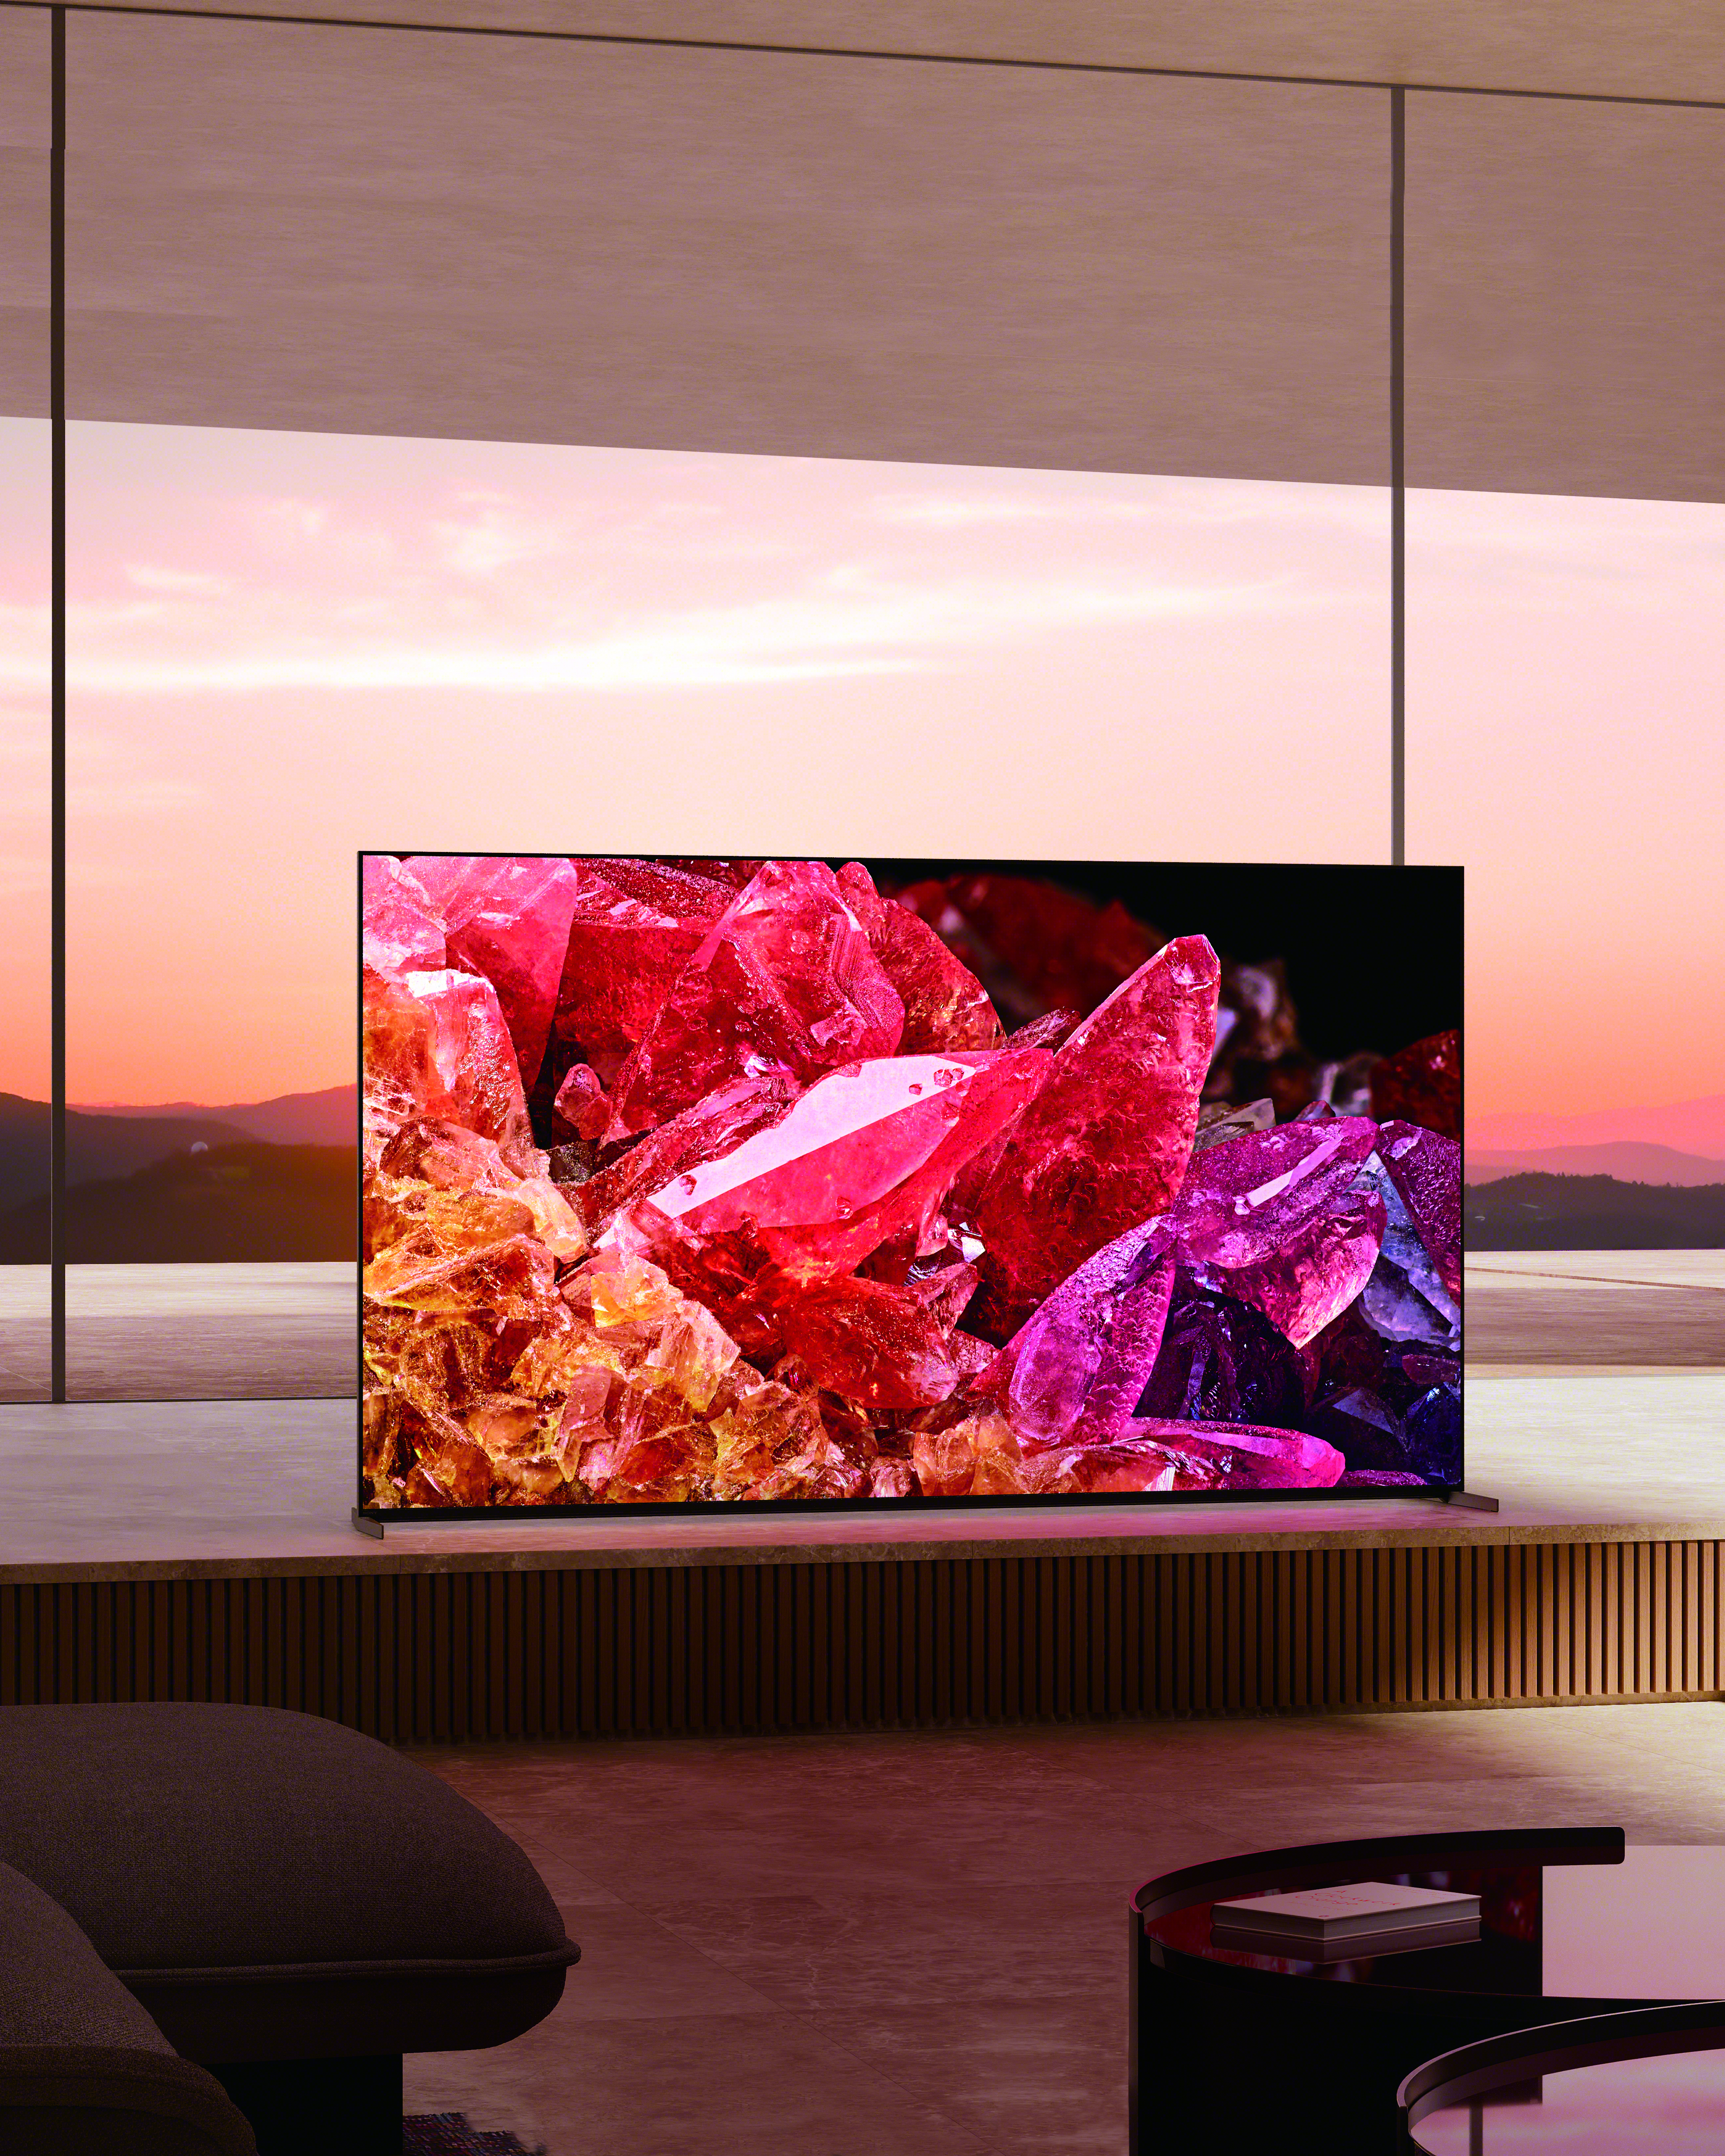 How to Select the Best TV for Your Room